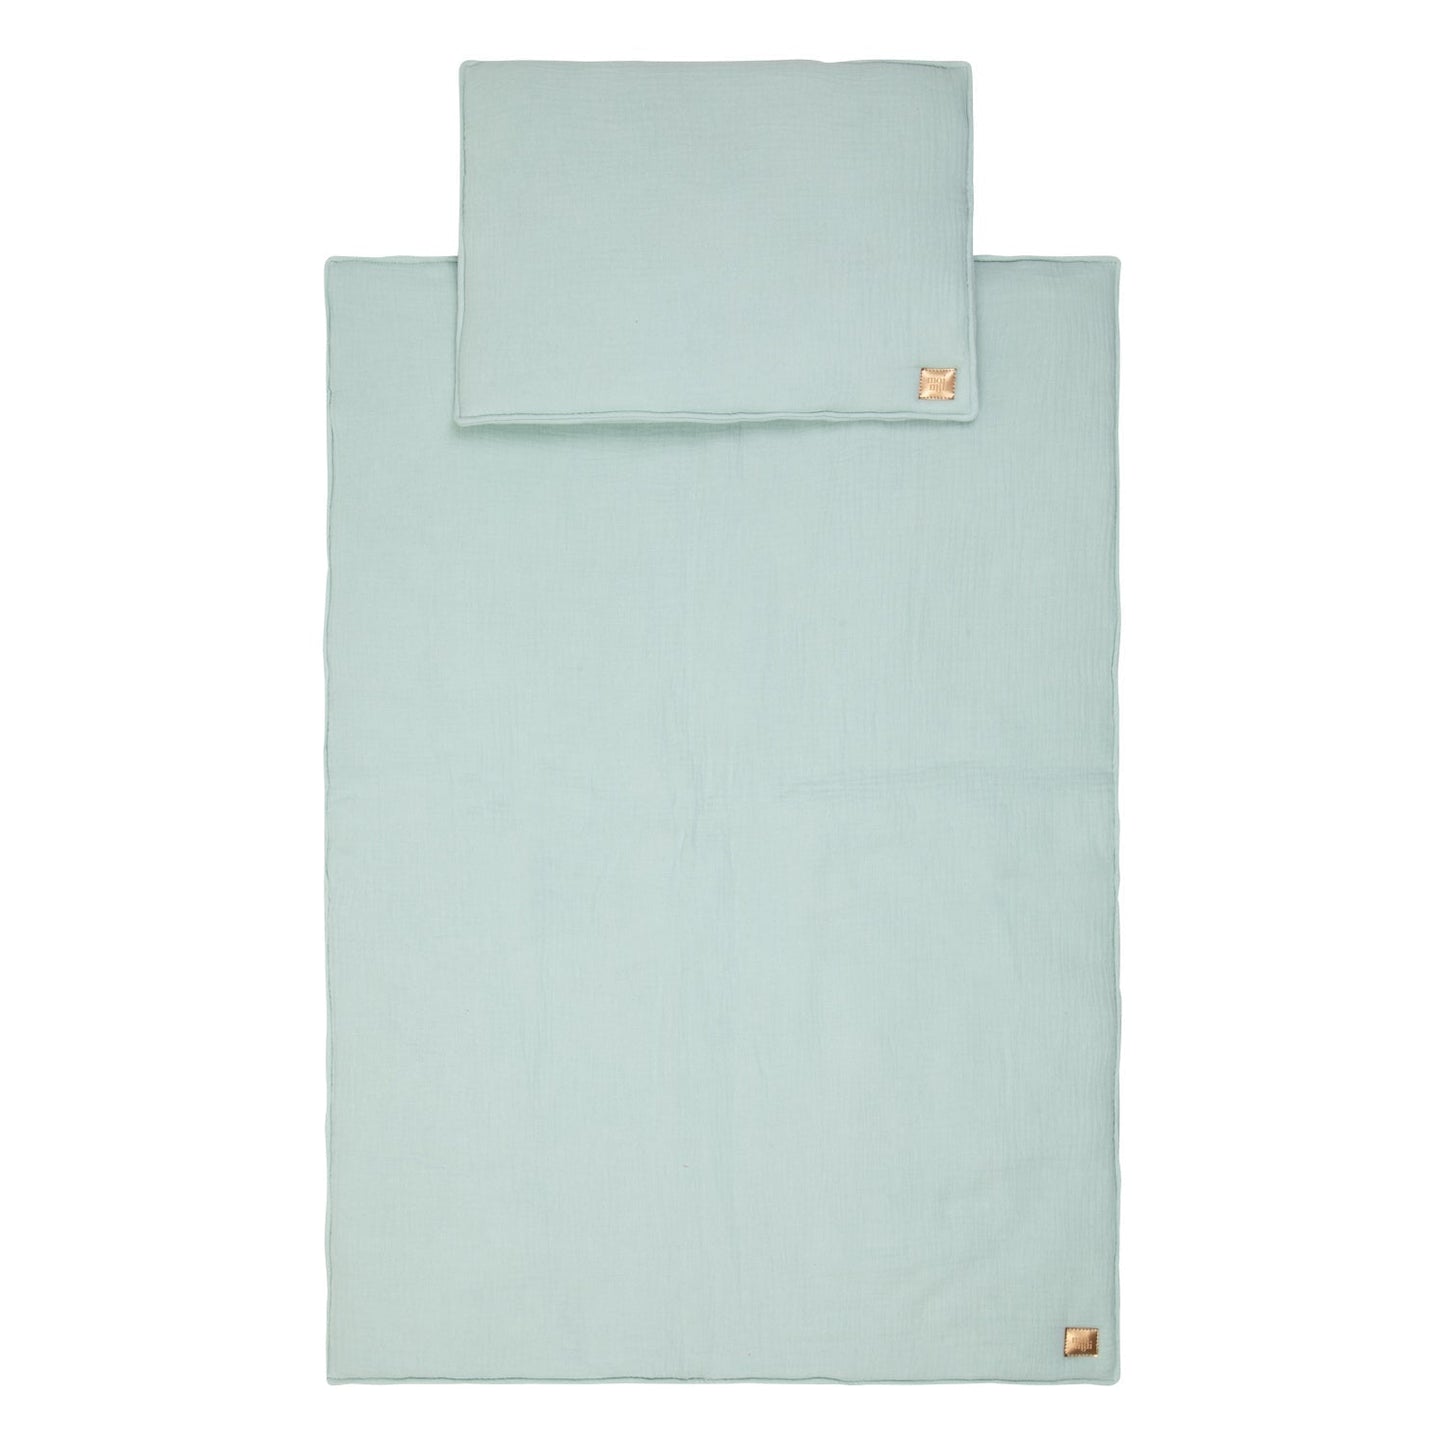 Muslin "Mint" Child Cover Set by Moi Mili